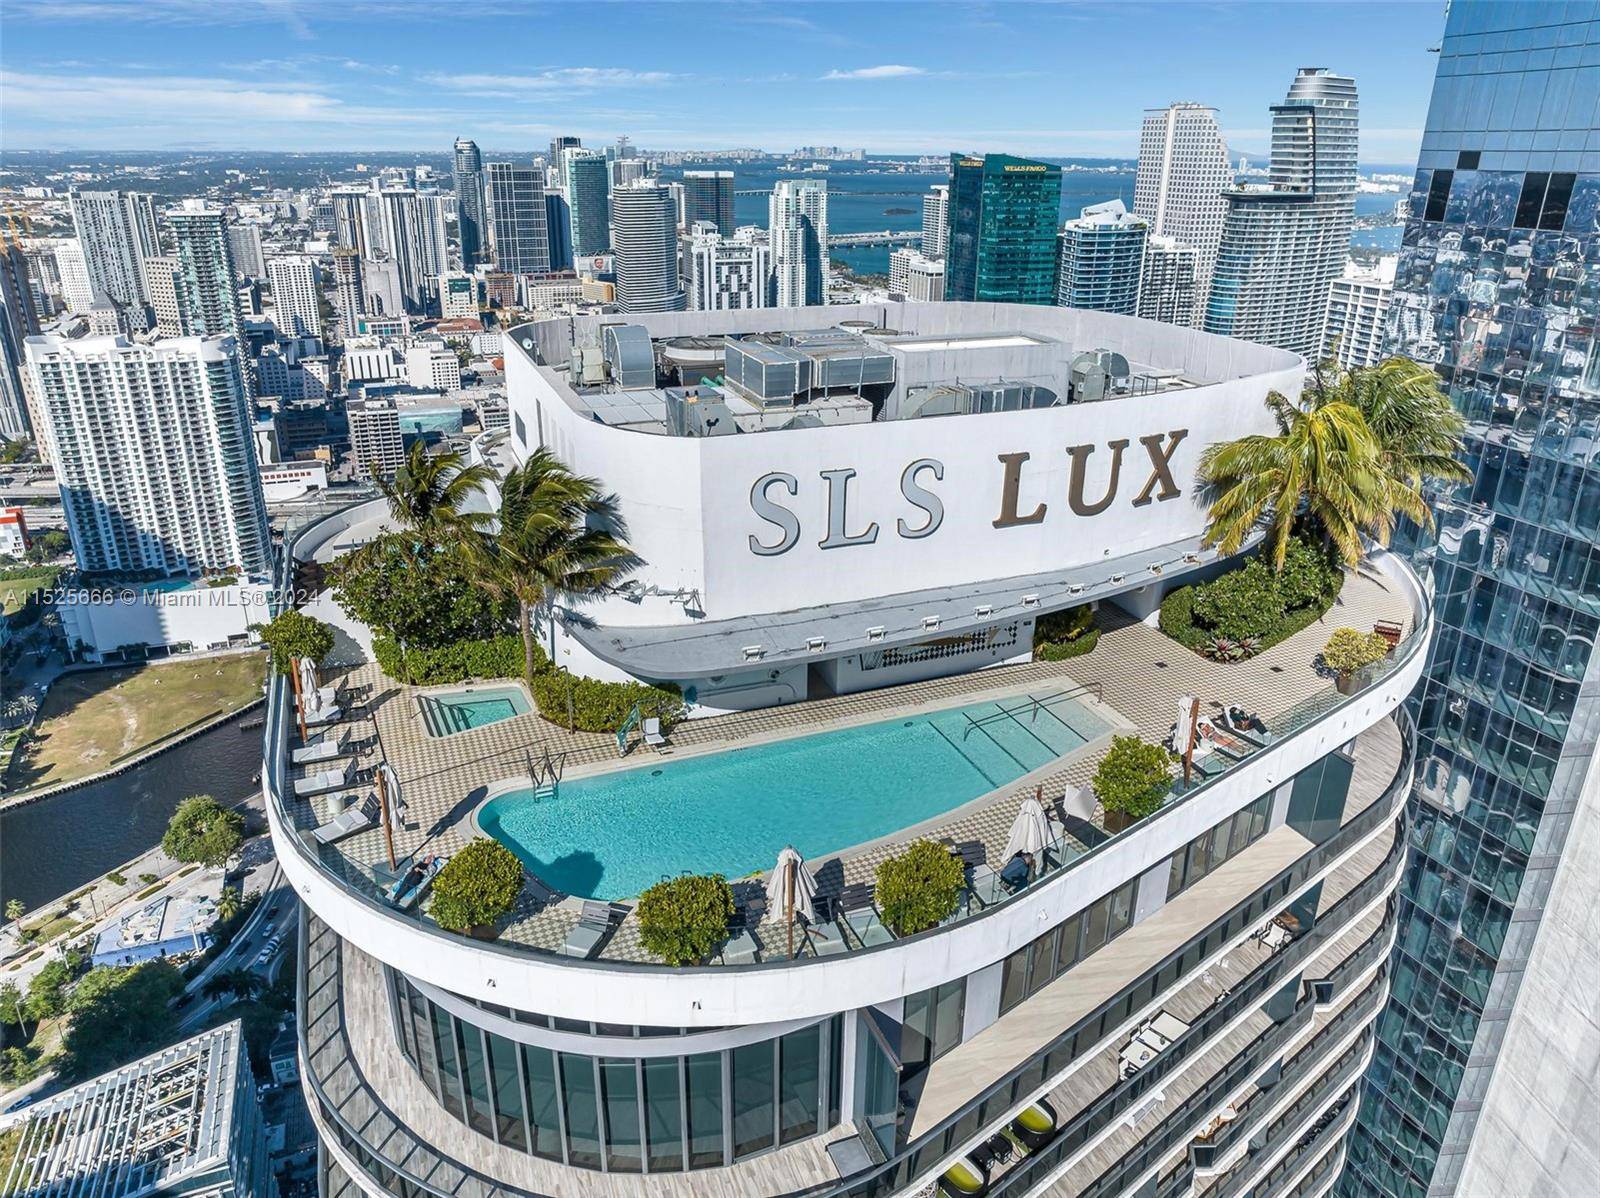 Introducing 2905 at SLS Lux, Brickell's luxury living.